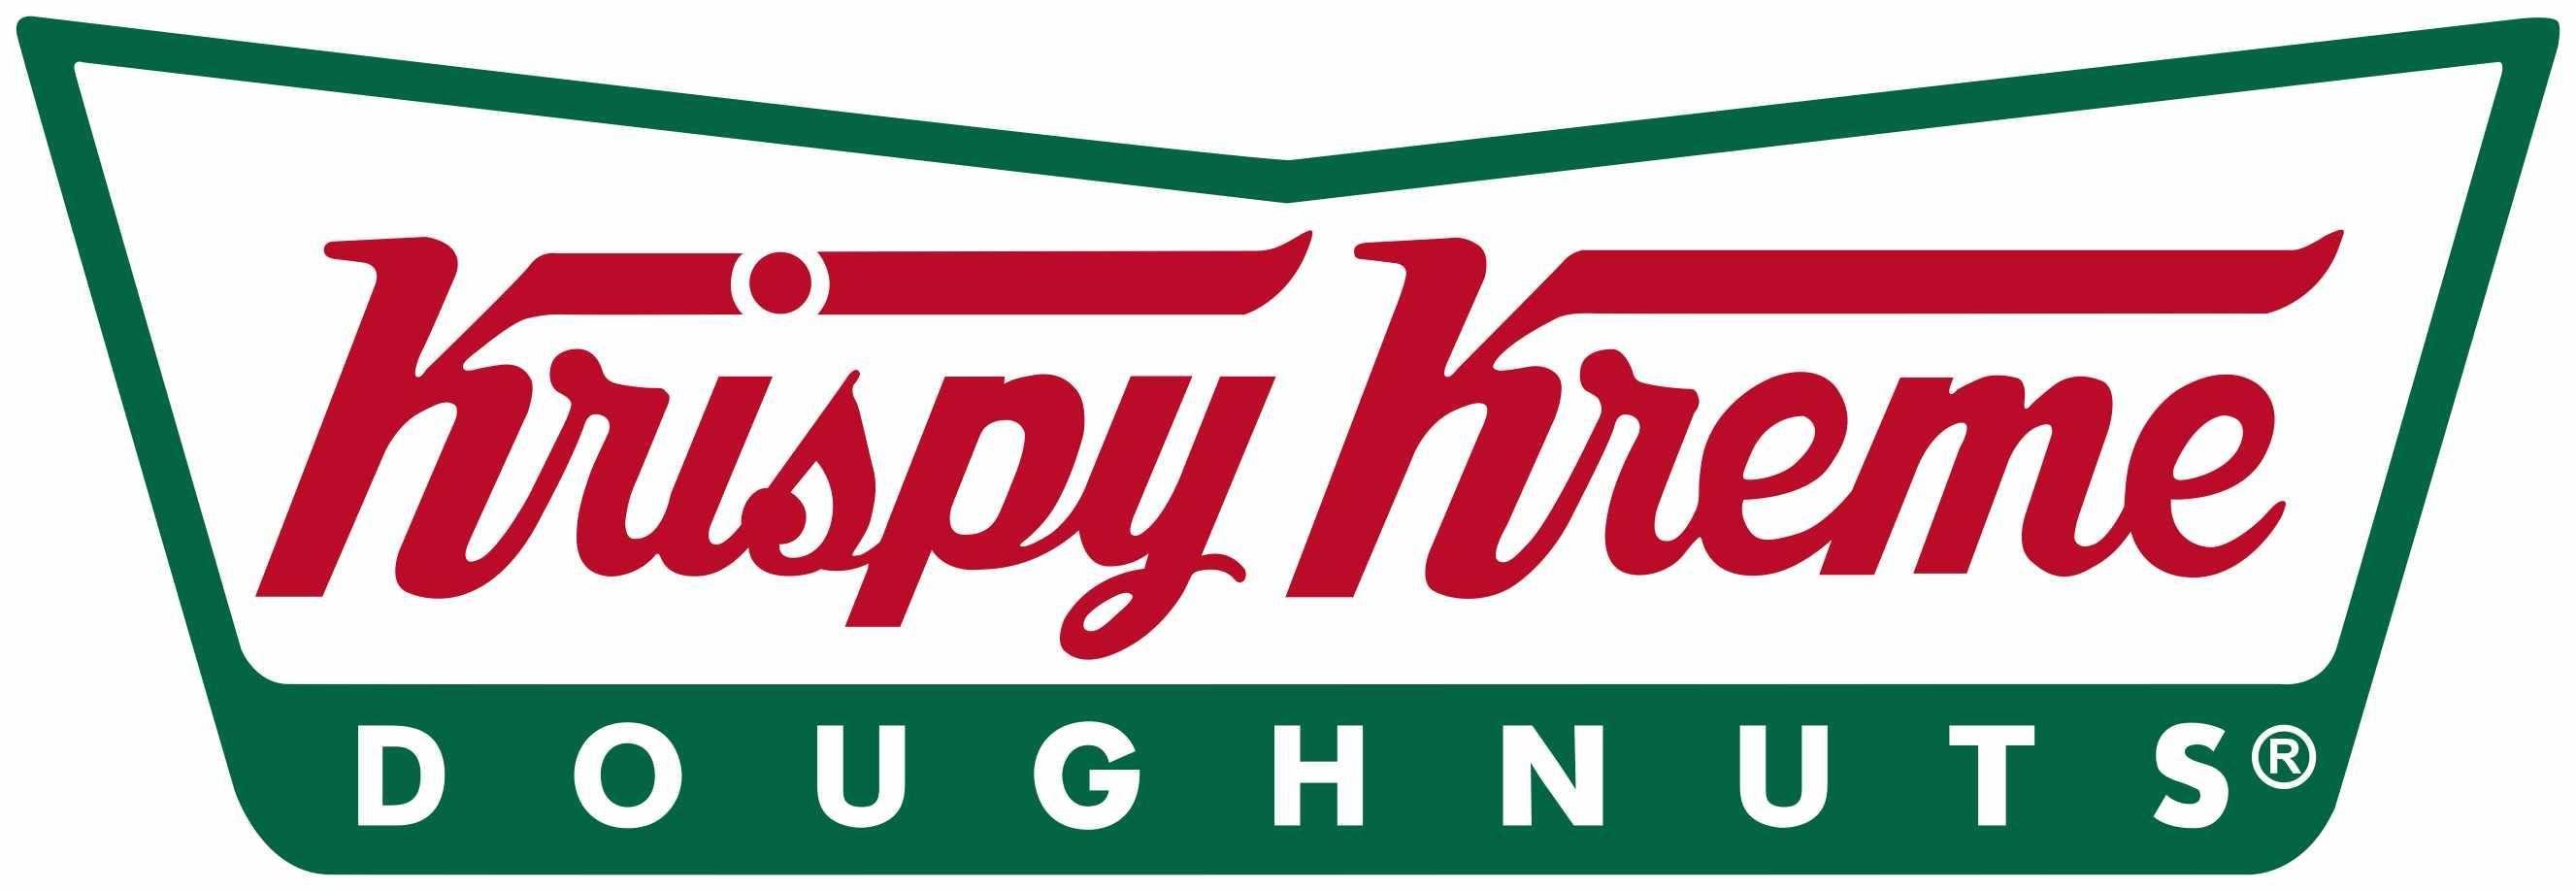 Complementary Color Logo - Krispy Kreme logo- Example of use of complementary colors. Design